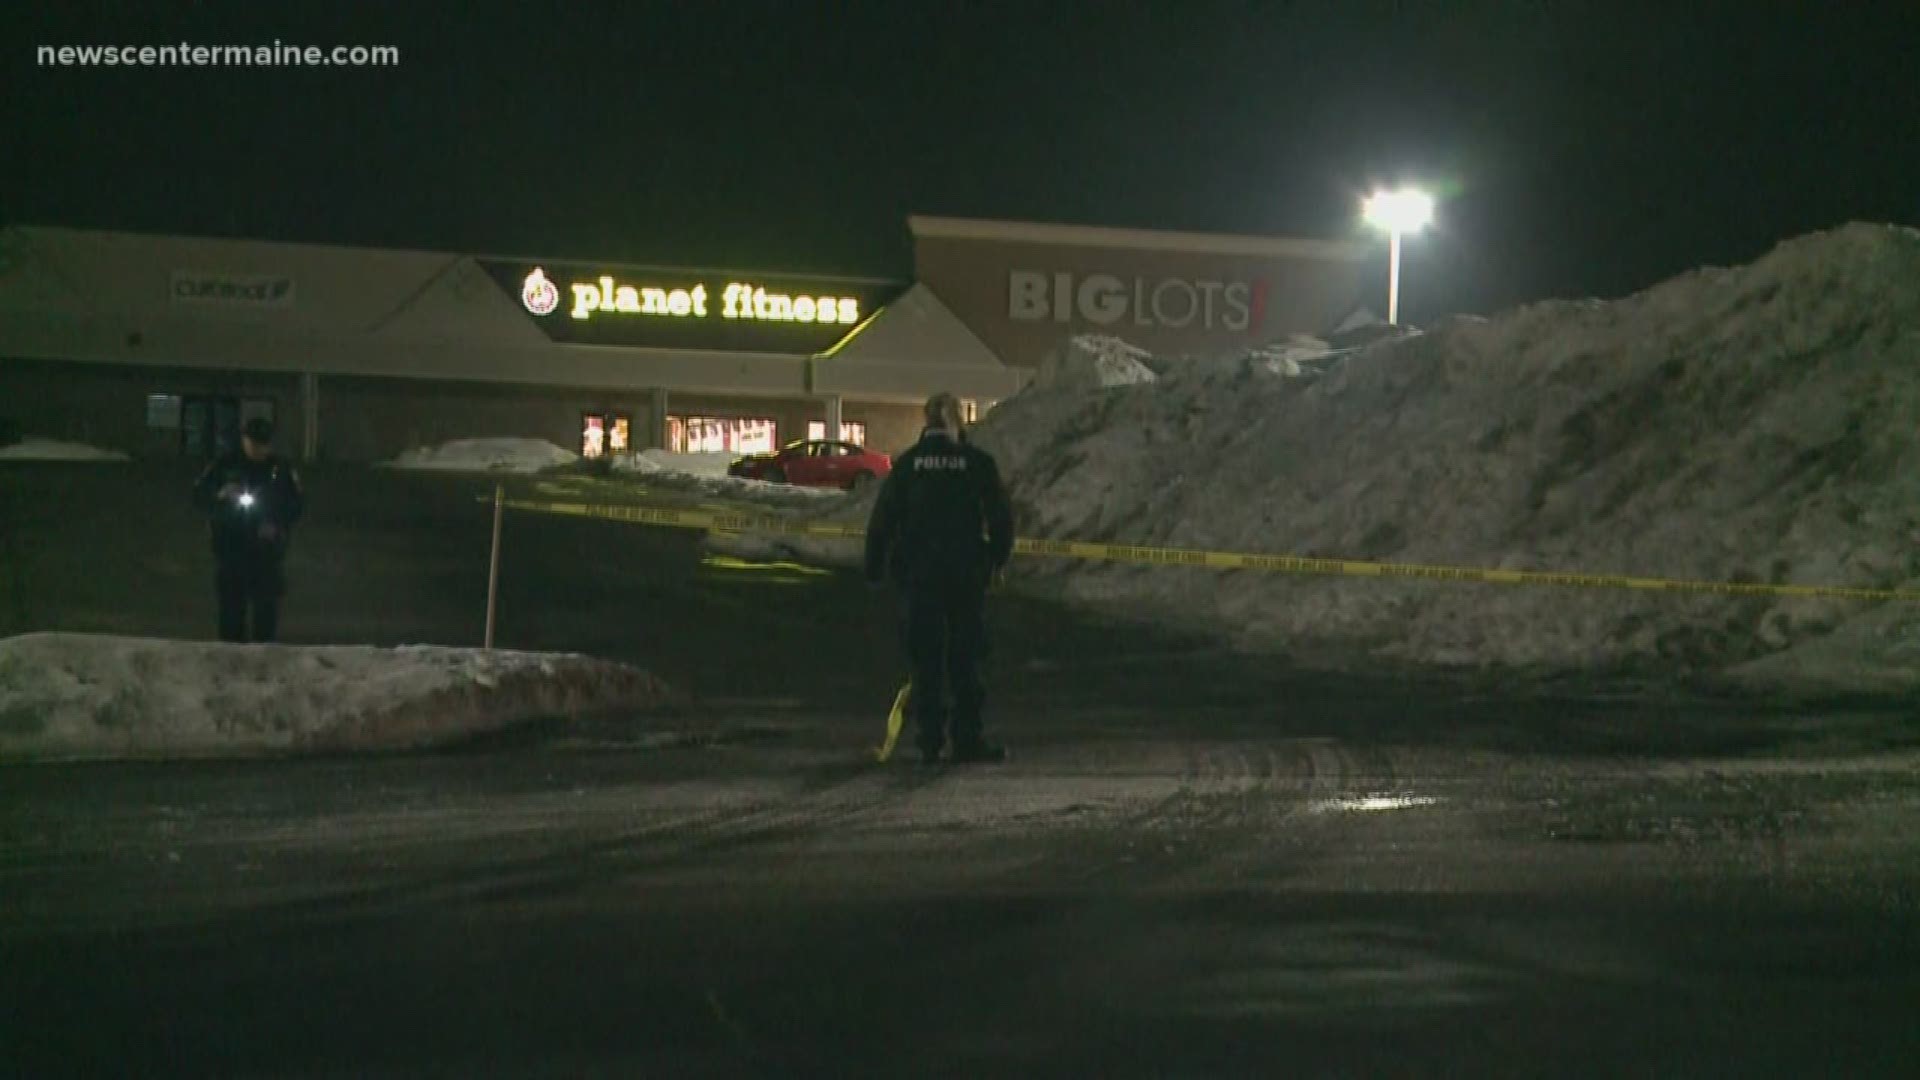 A person is in the hospital after an overnight robbery and shooting in the parking lot of Auburn Plaza.